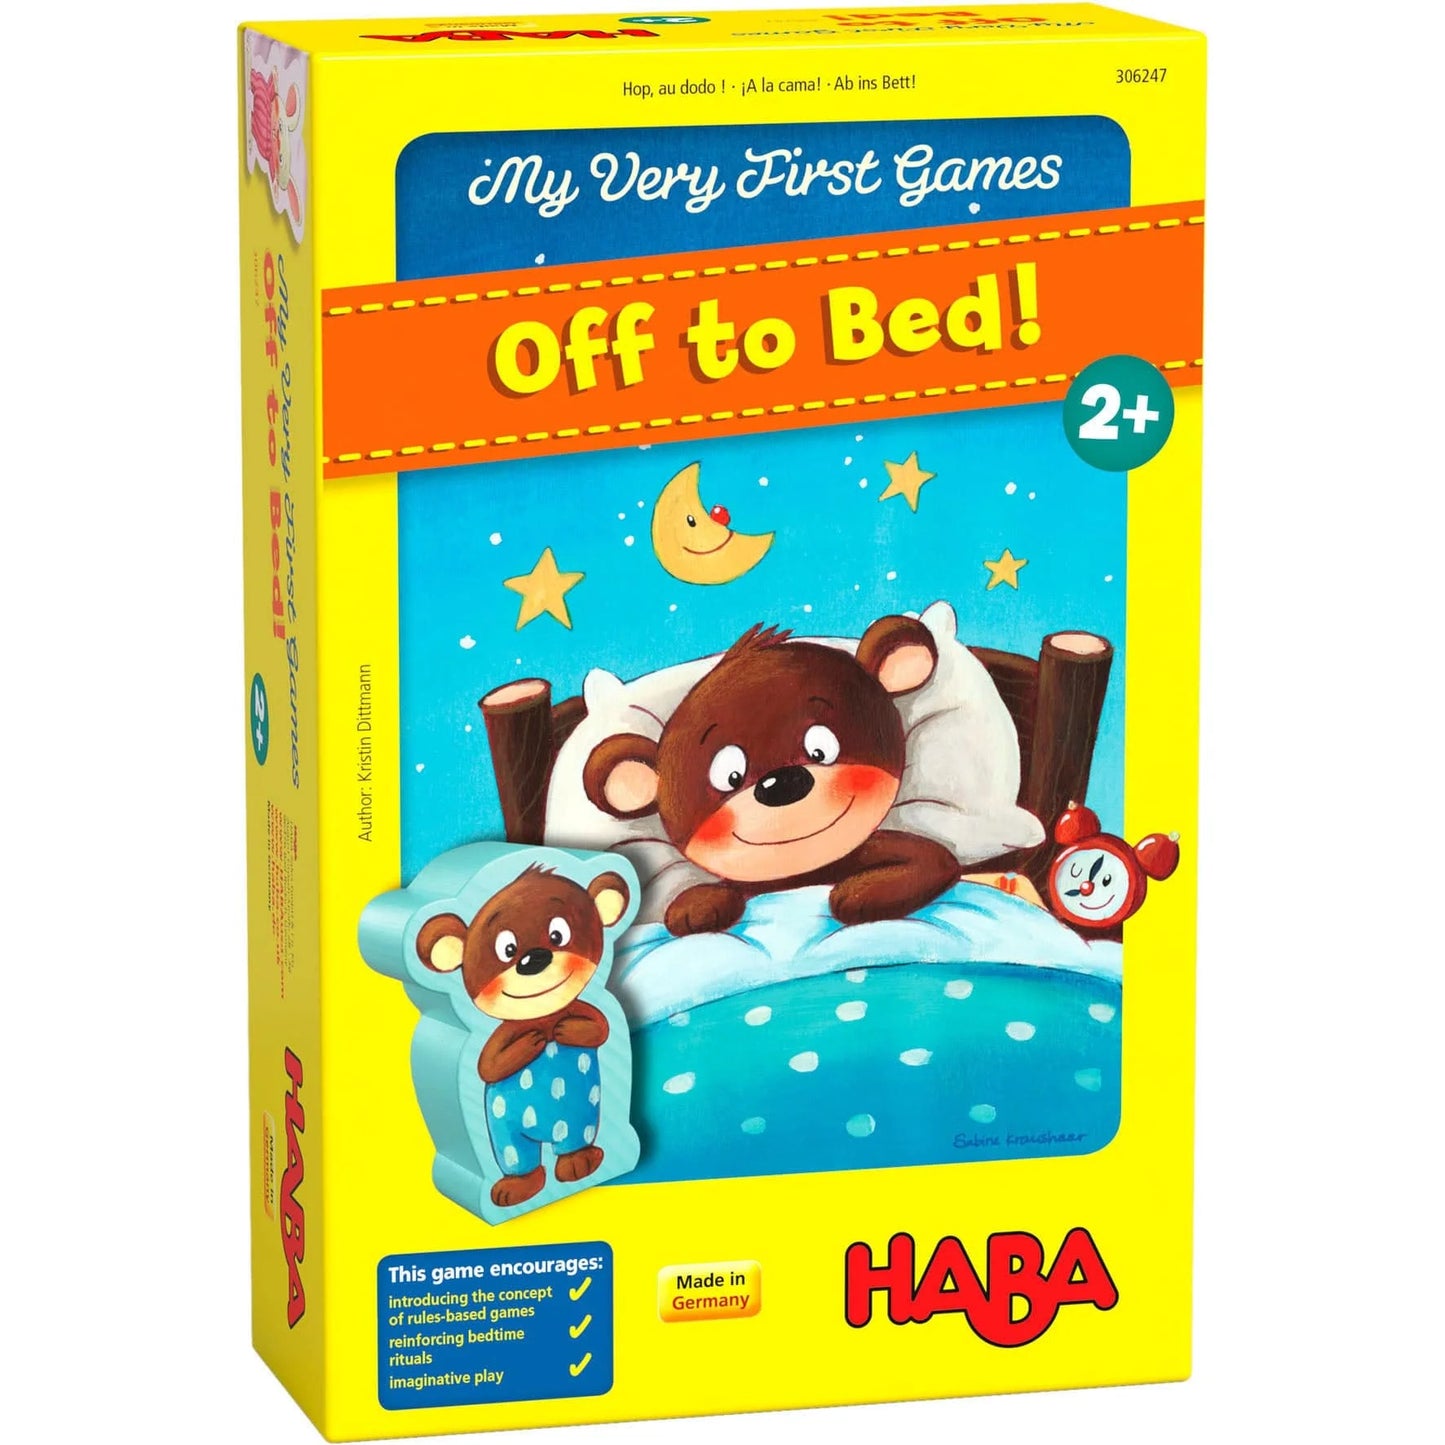 HABA My Very First Games Off to Bed! Matching Game 配對遊戲